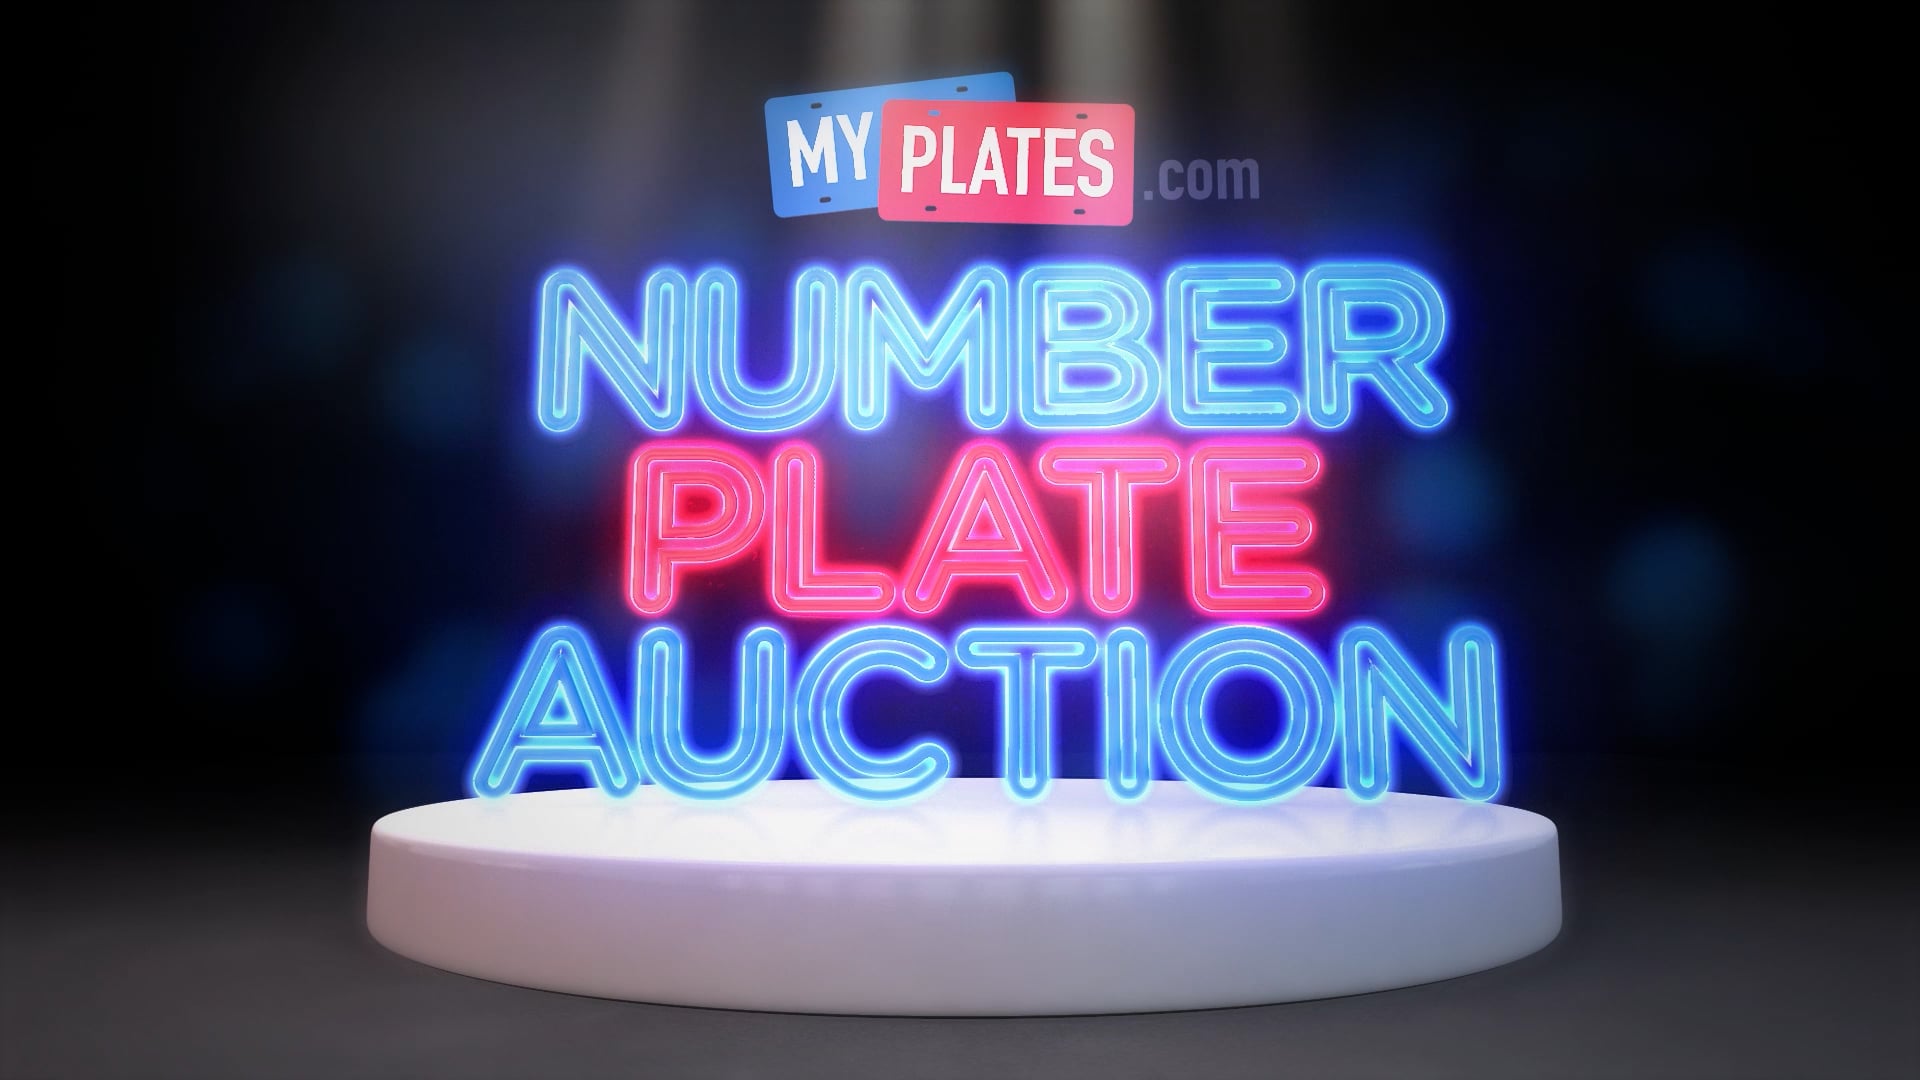 myplates-2022-number-plate-auction-on-vimeo